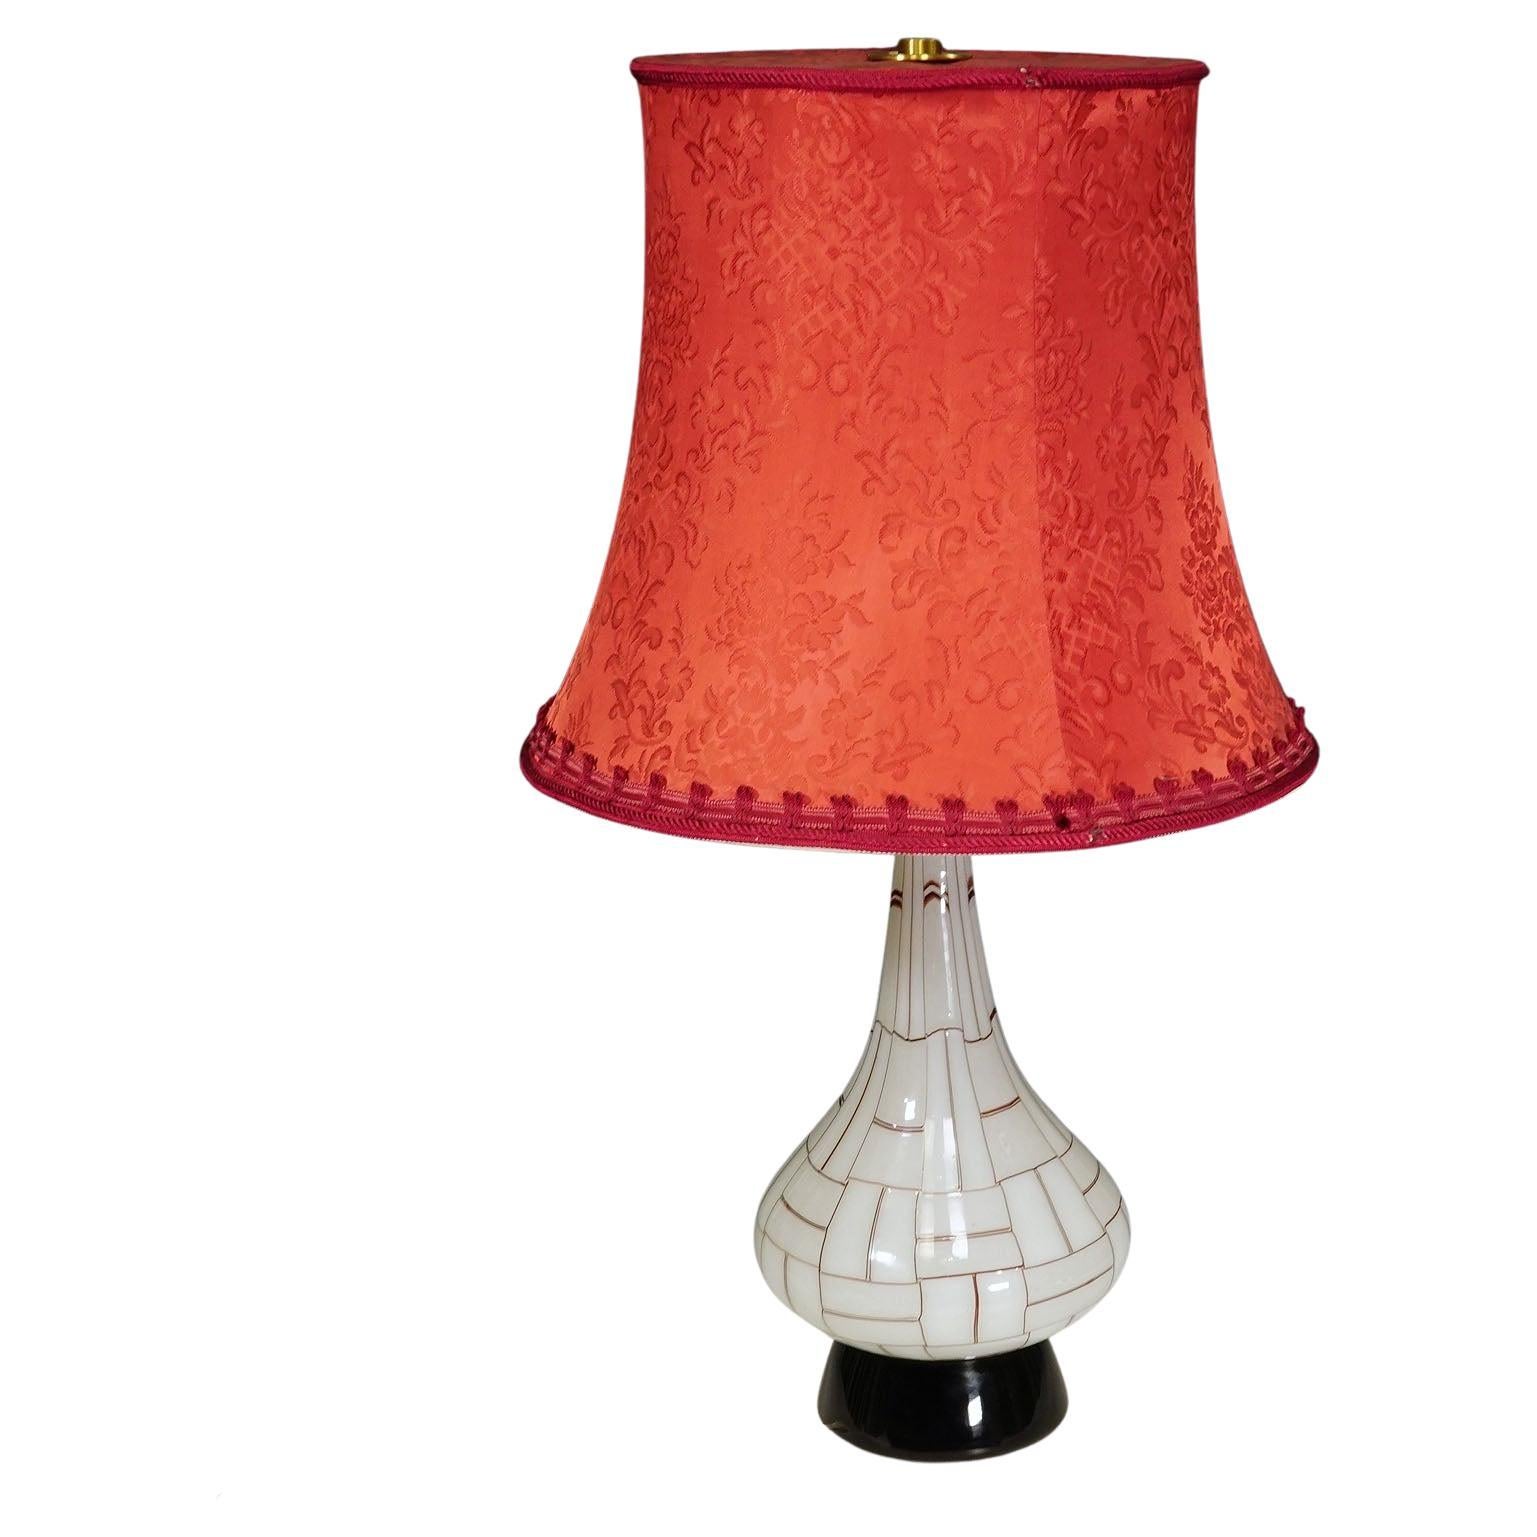 Vintage Barovier & Toso 'Sidone' Table Lamp, Murano circa 1960s For Sale